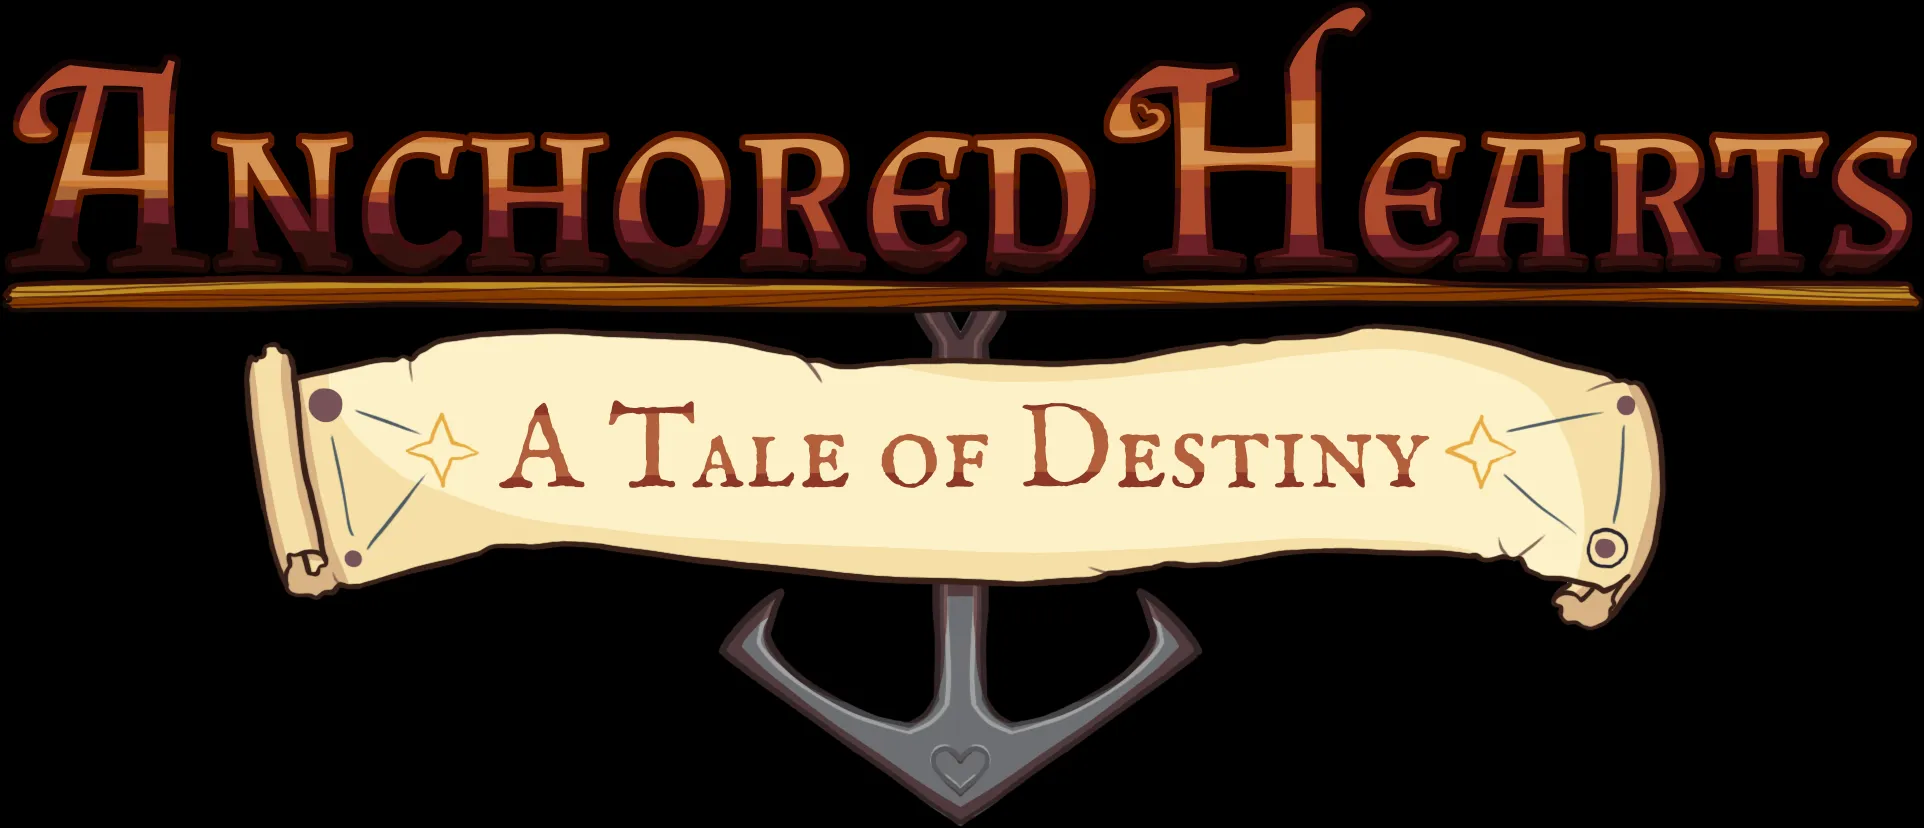 Anchored Hearts: A Tale of Destiny Windows game - ModDB